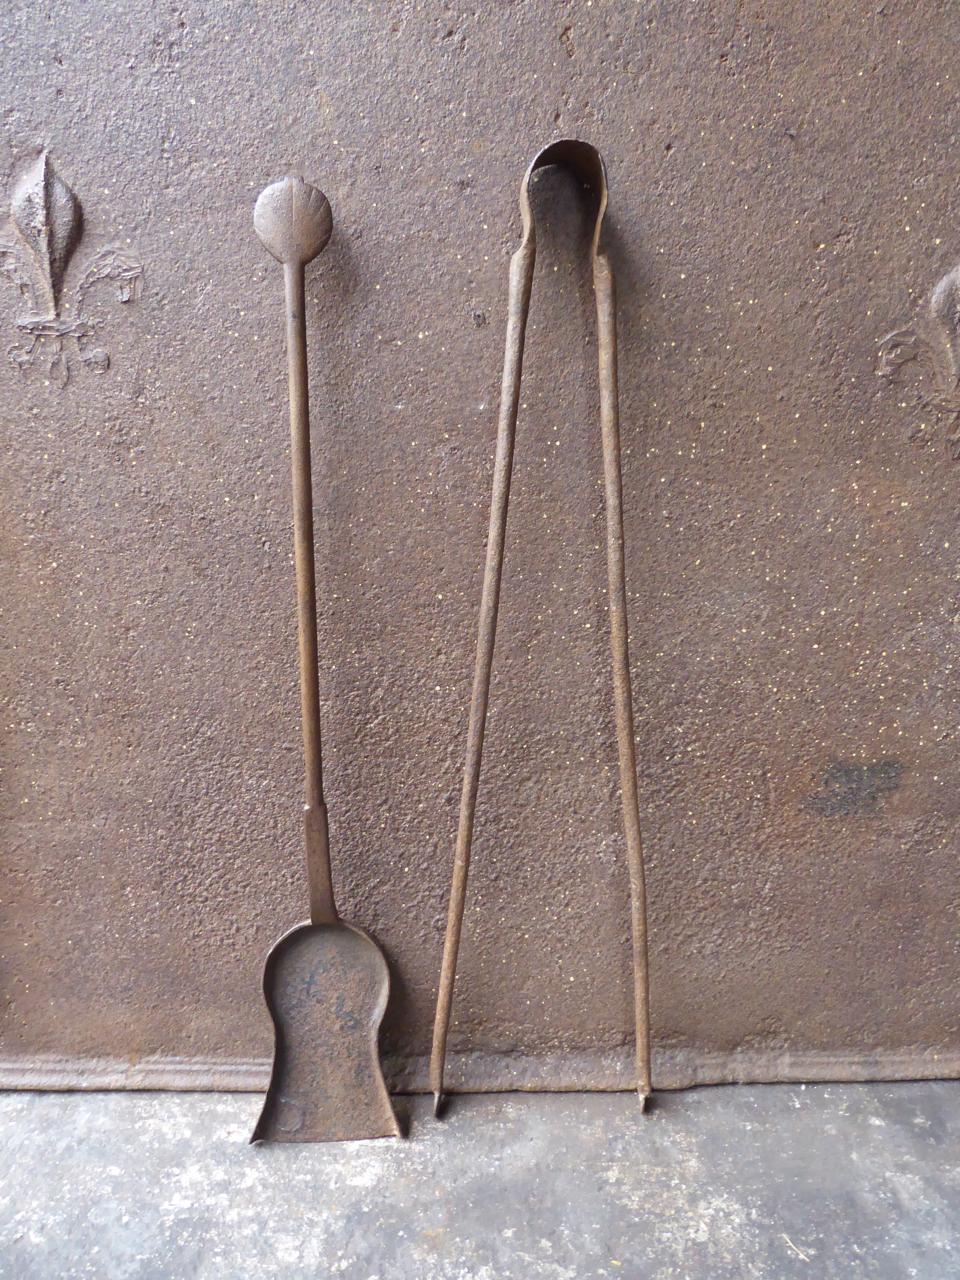 18th century French Louis XV fireplace tool set. The fire irons are made of wrought iron. They are in a good condition and fully functional.